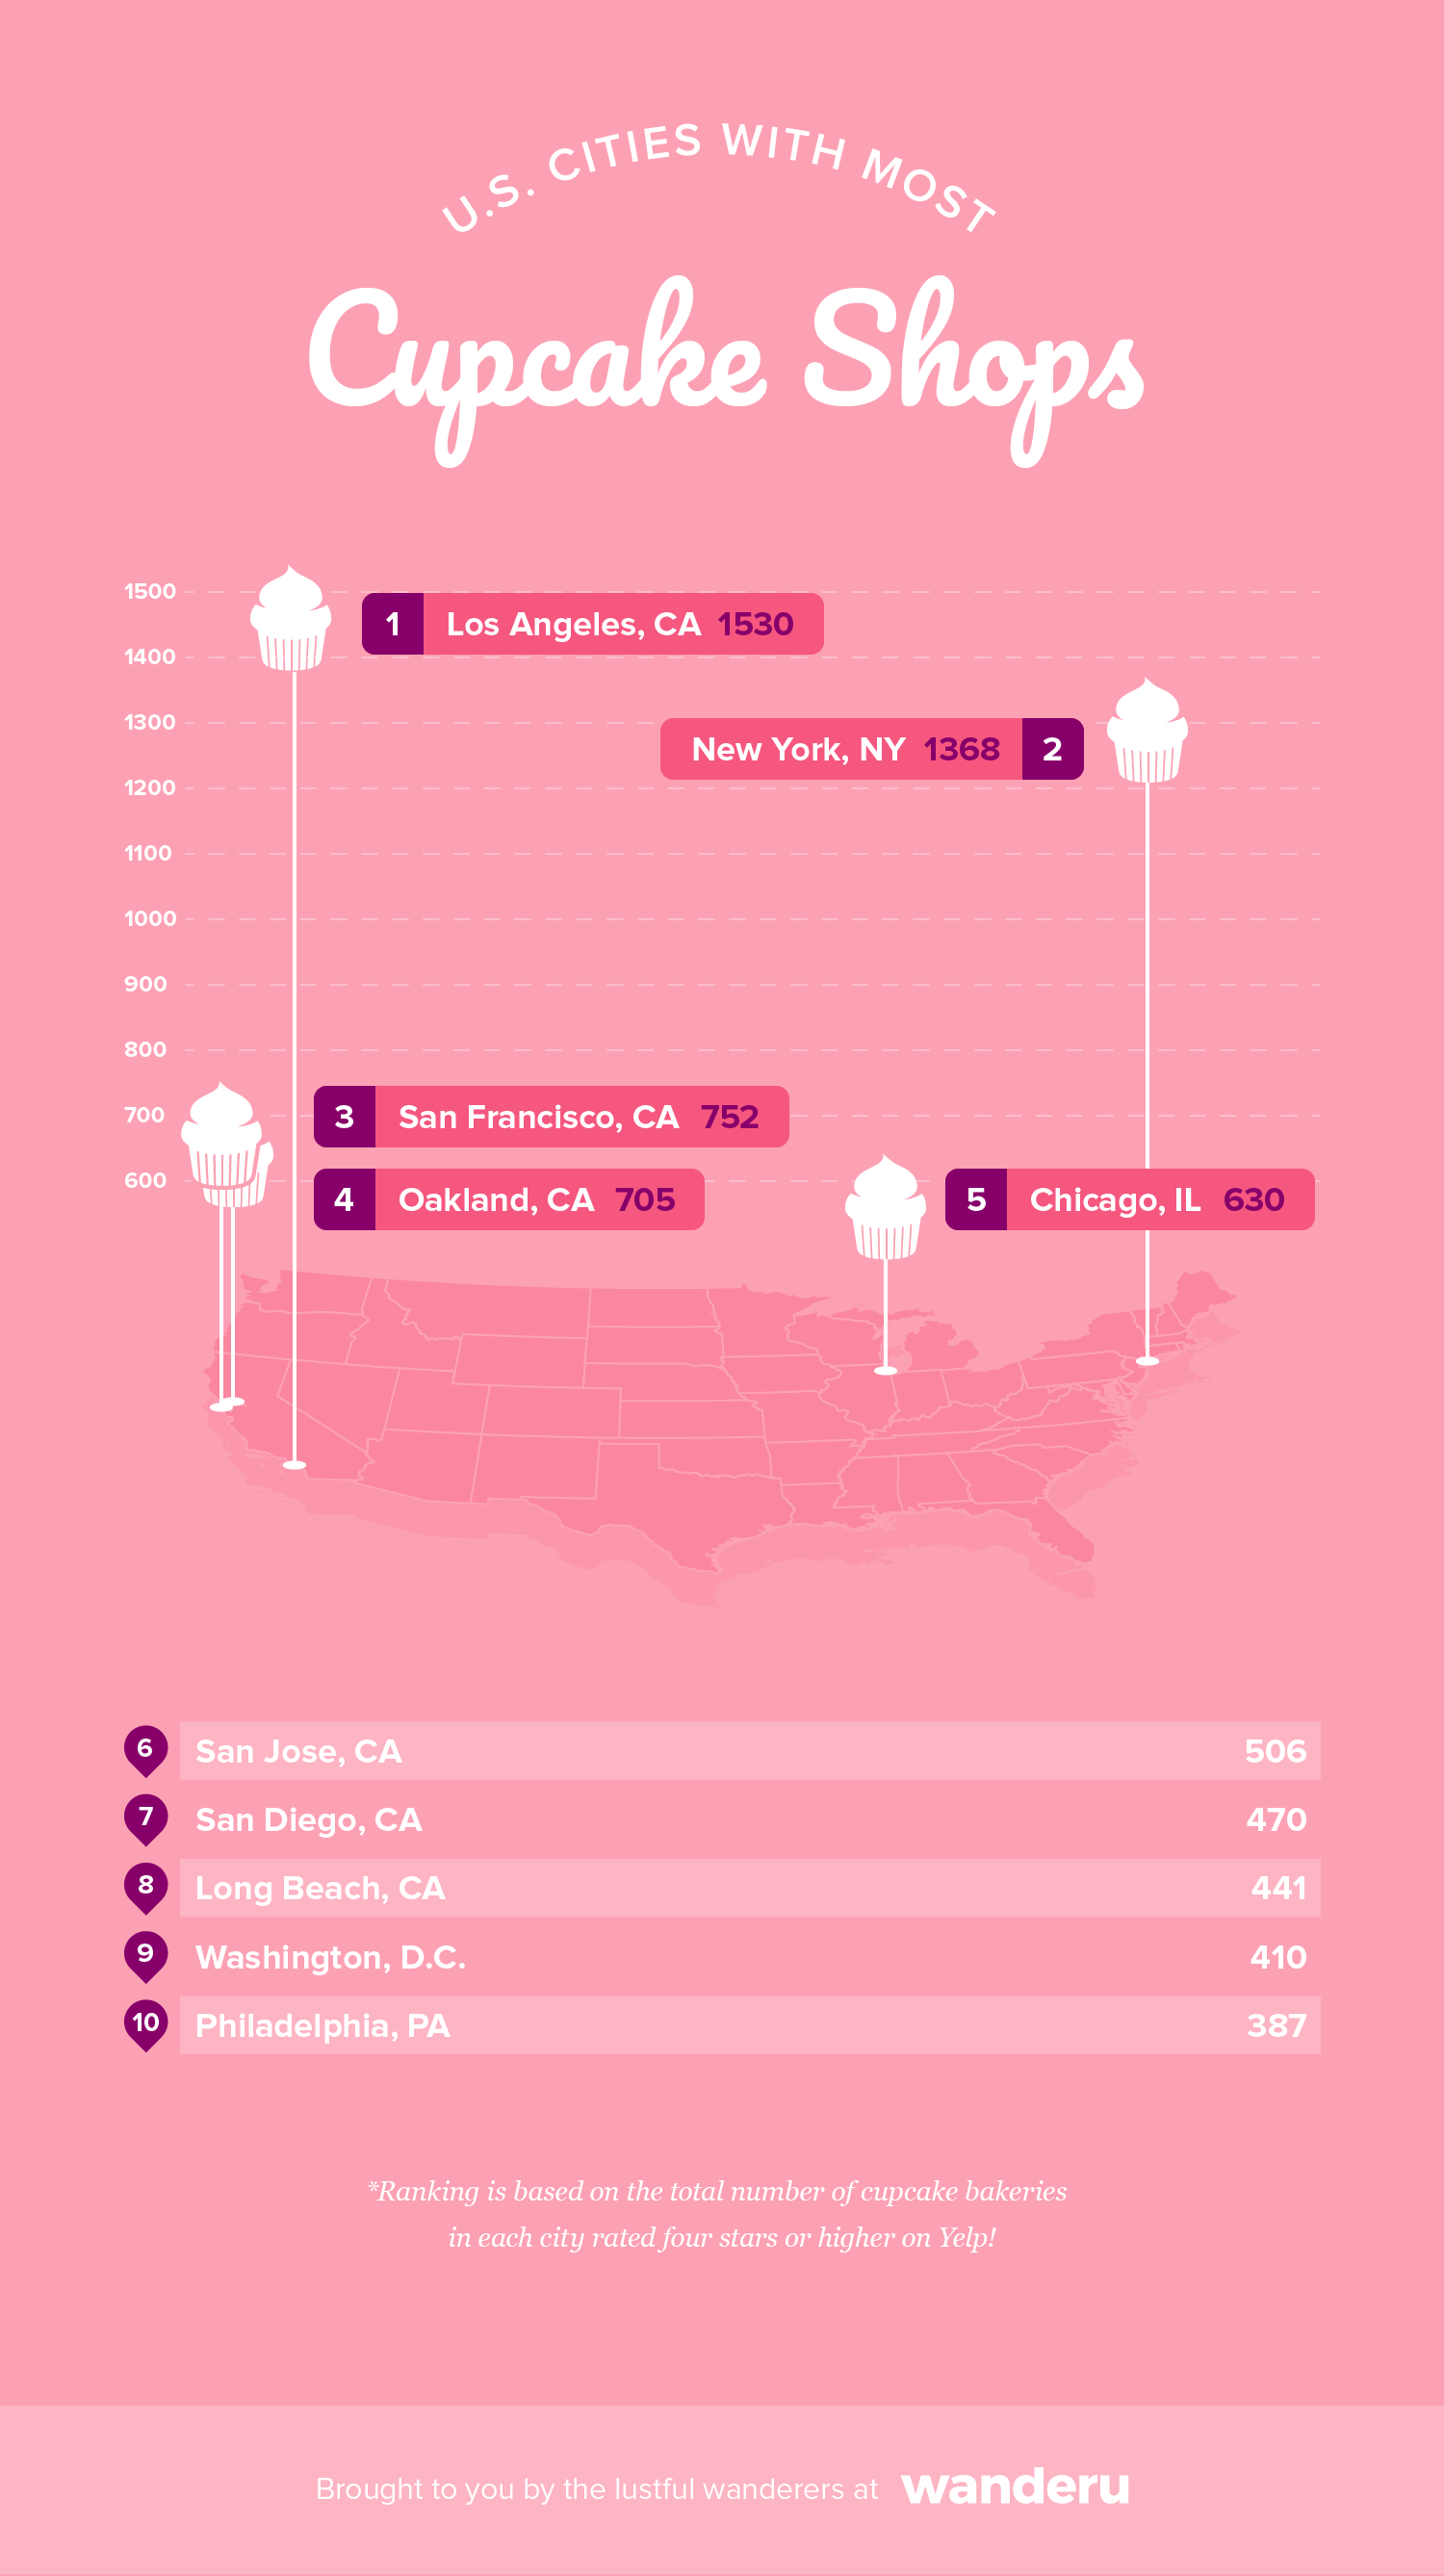 Graphic depicts the top 10 U.S. cities with the most cupcake shops in the U.S.